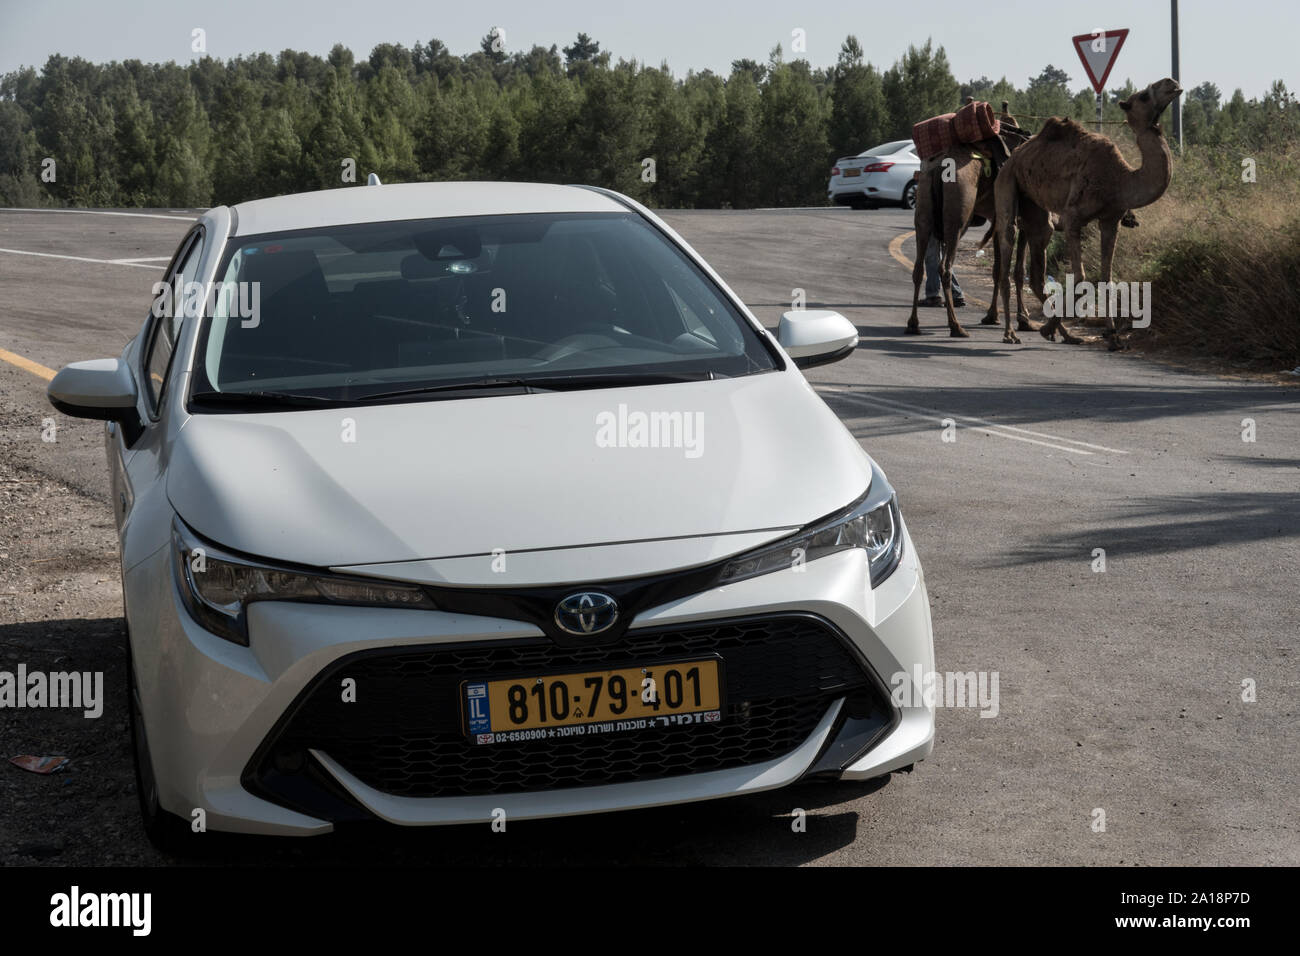 A 2019 Toyota Corolla Excite Hatchback stands in the foreground with a pair of camels in the background illustrating methods of transportation separat Stock Photo